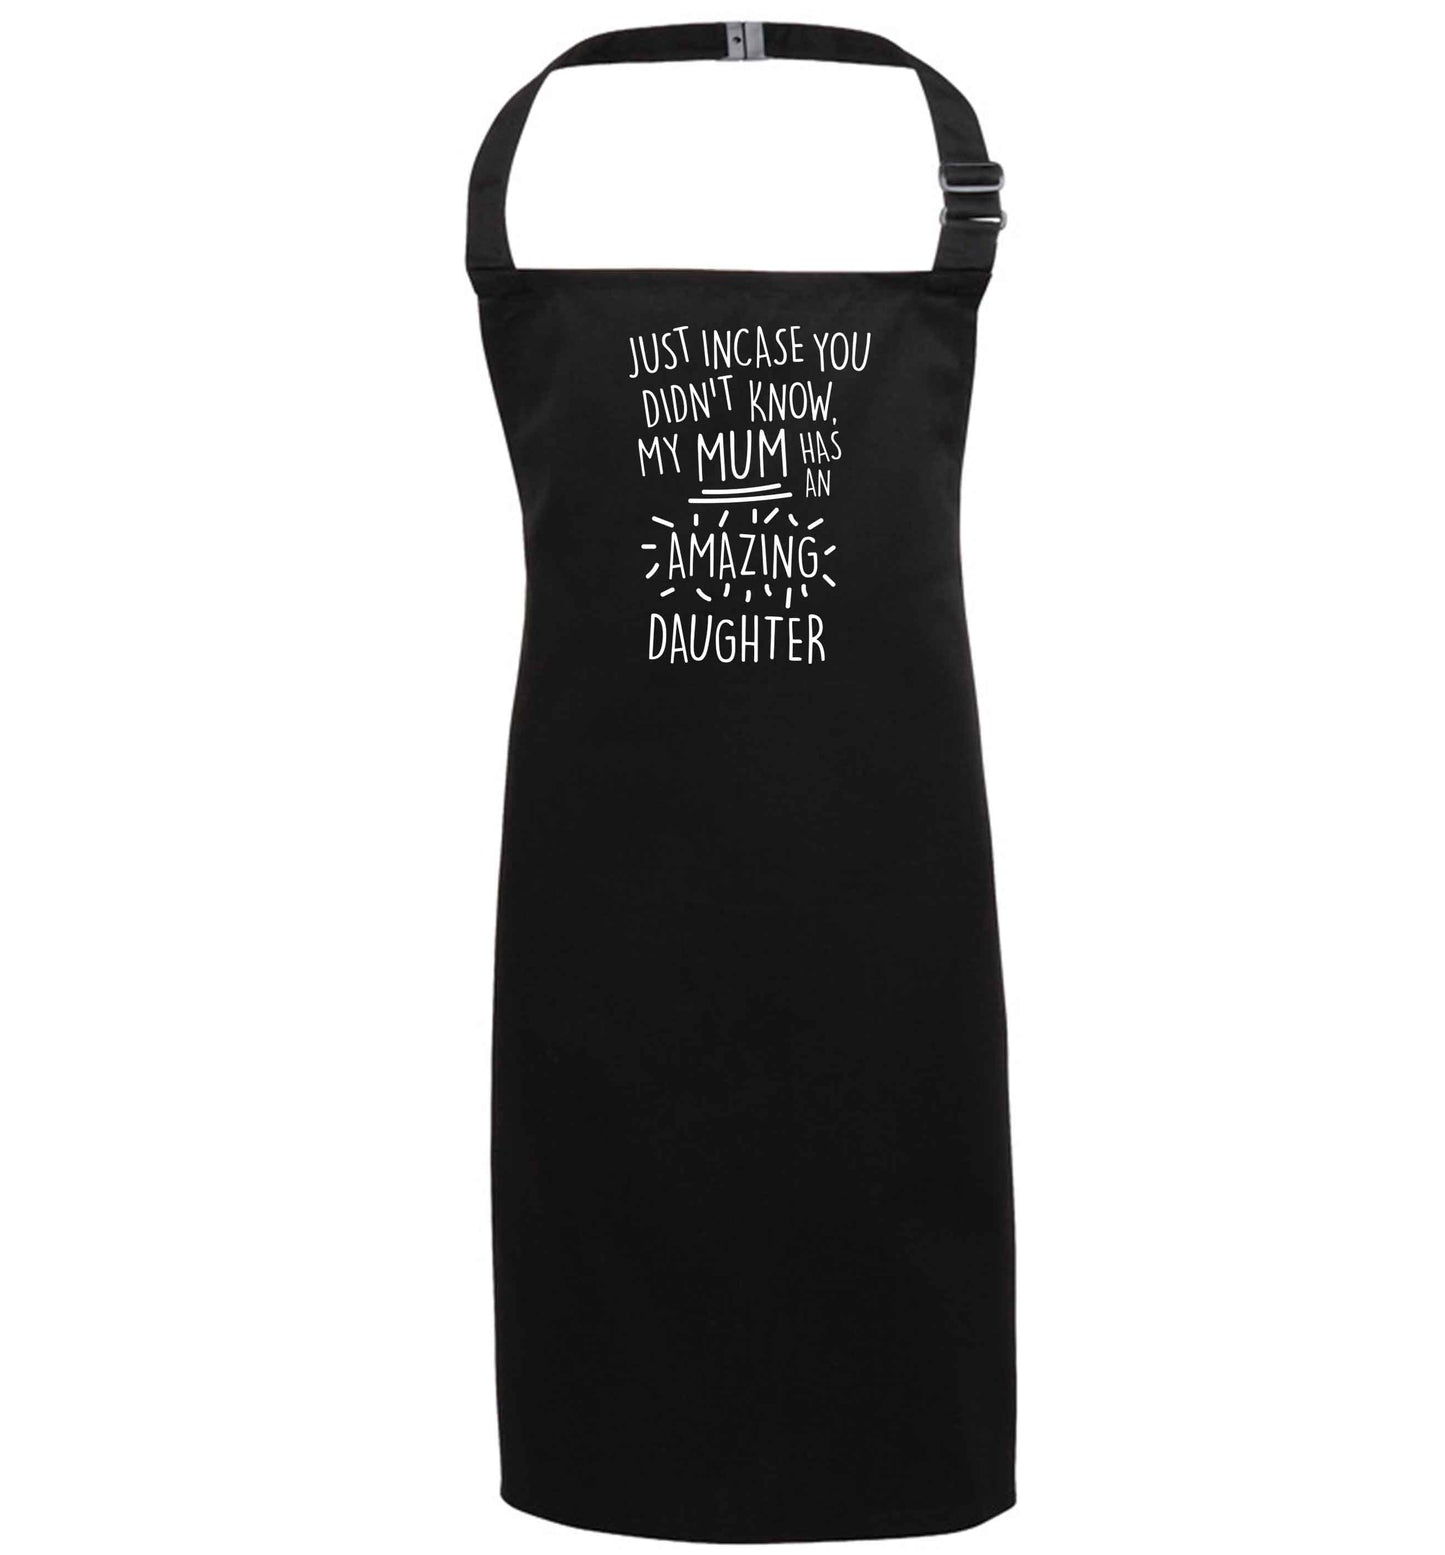 Just incase you didn't know my mum has an amazing daughter black apron 7-10 years